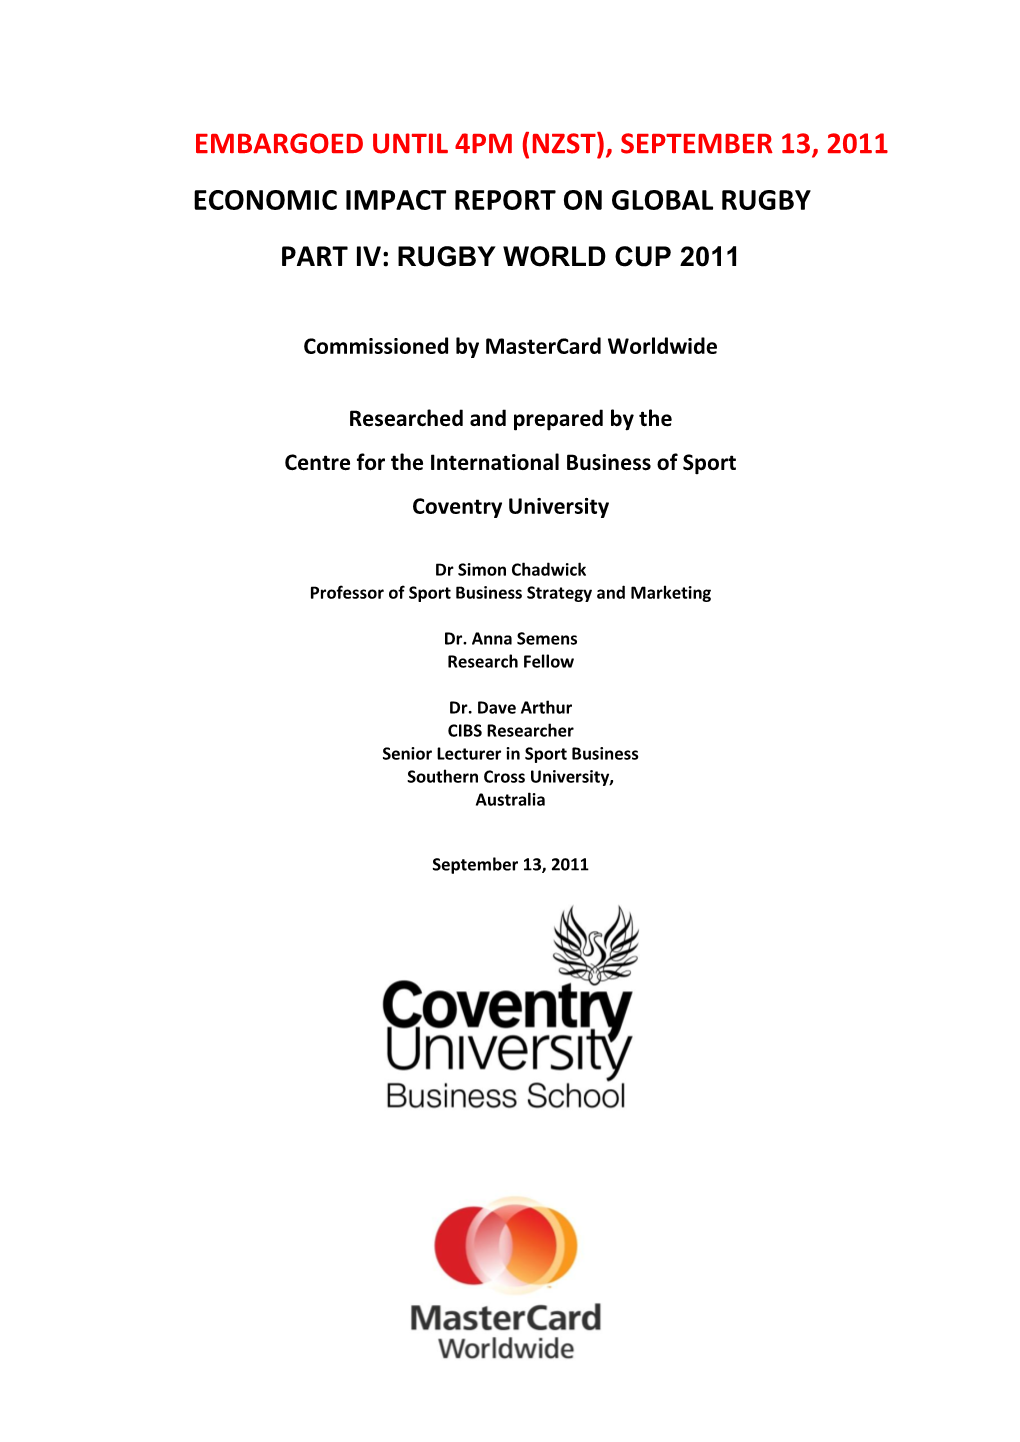 Economic and Commercial Impact of 2011 Rugby World